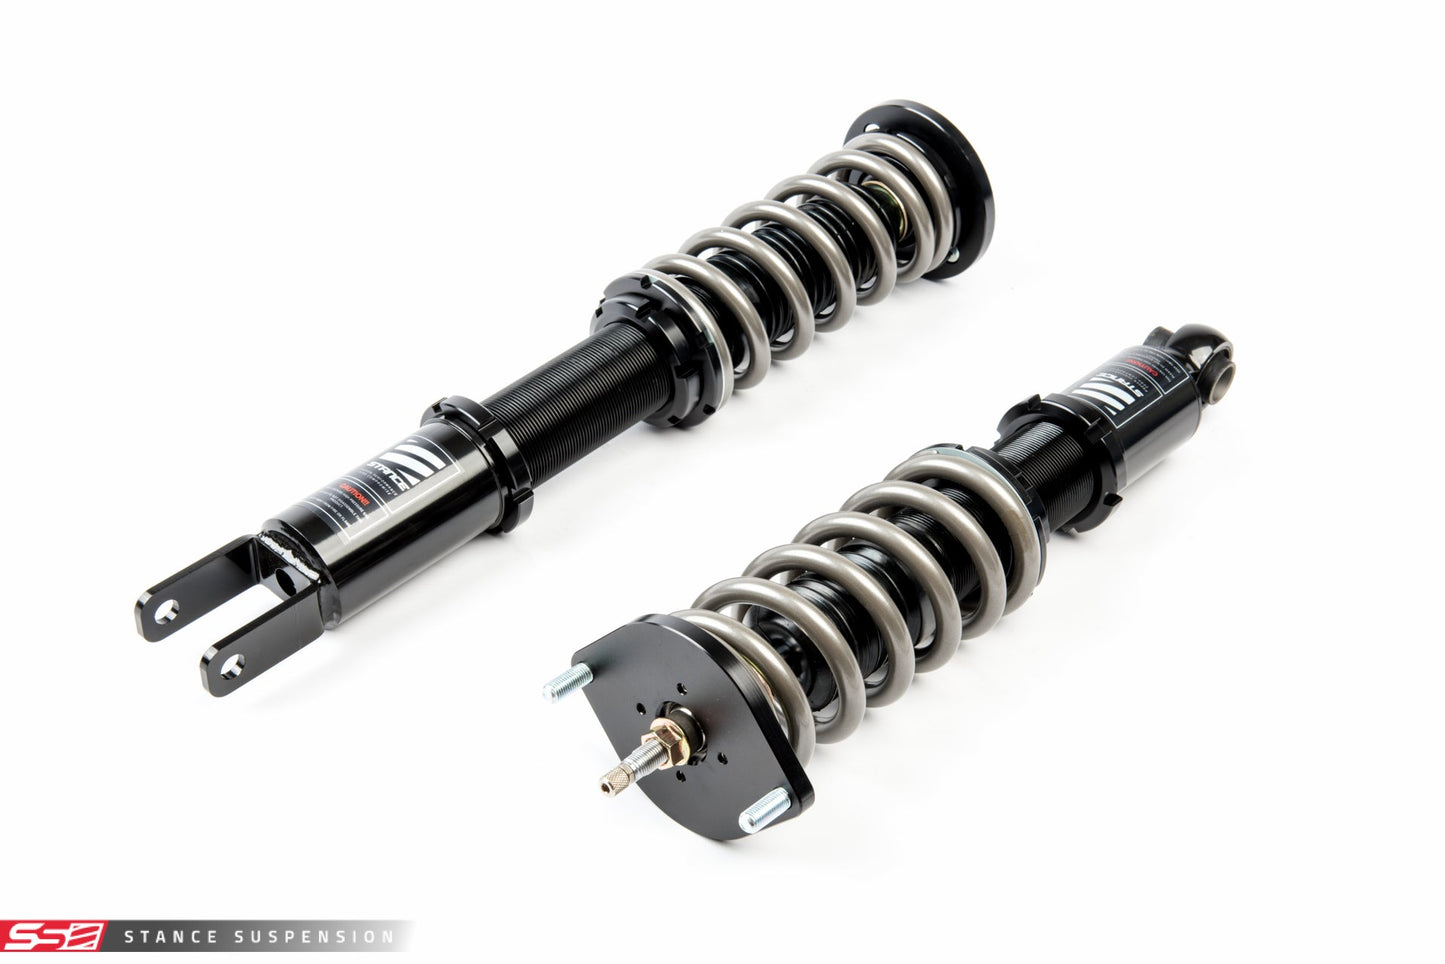 Stance Suspension - XR1 Coilovers for 90-96 Nissan 300ZX Z32 (ST-Z32-XR1)